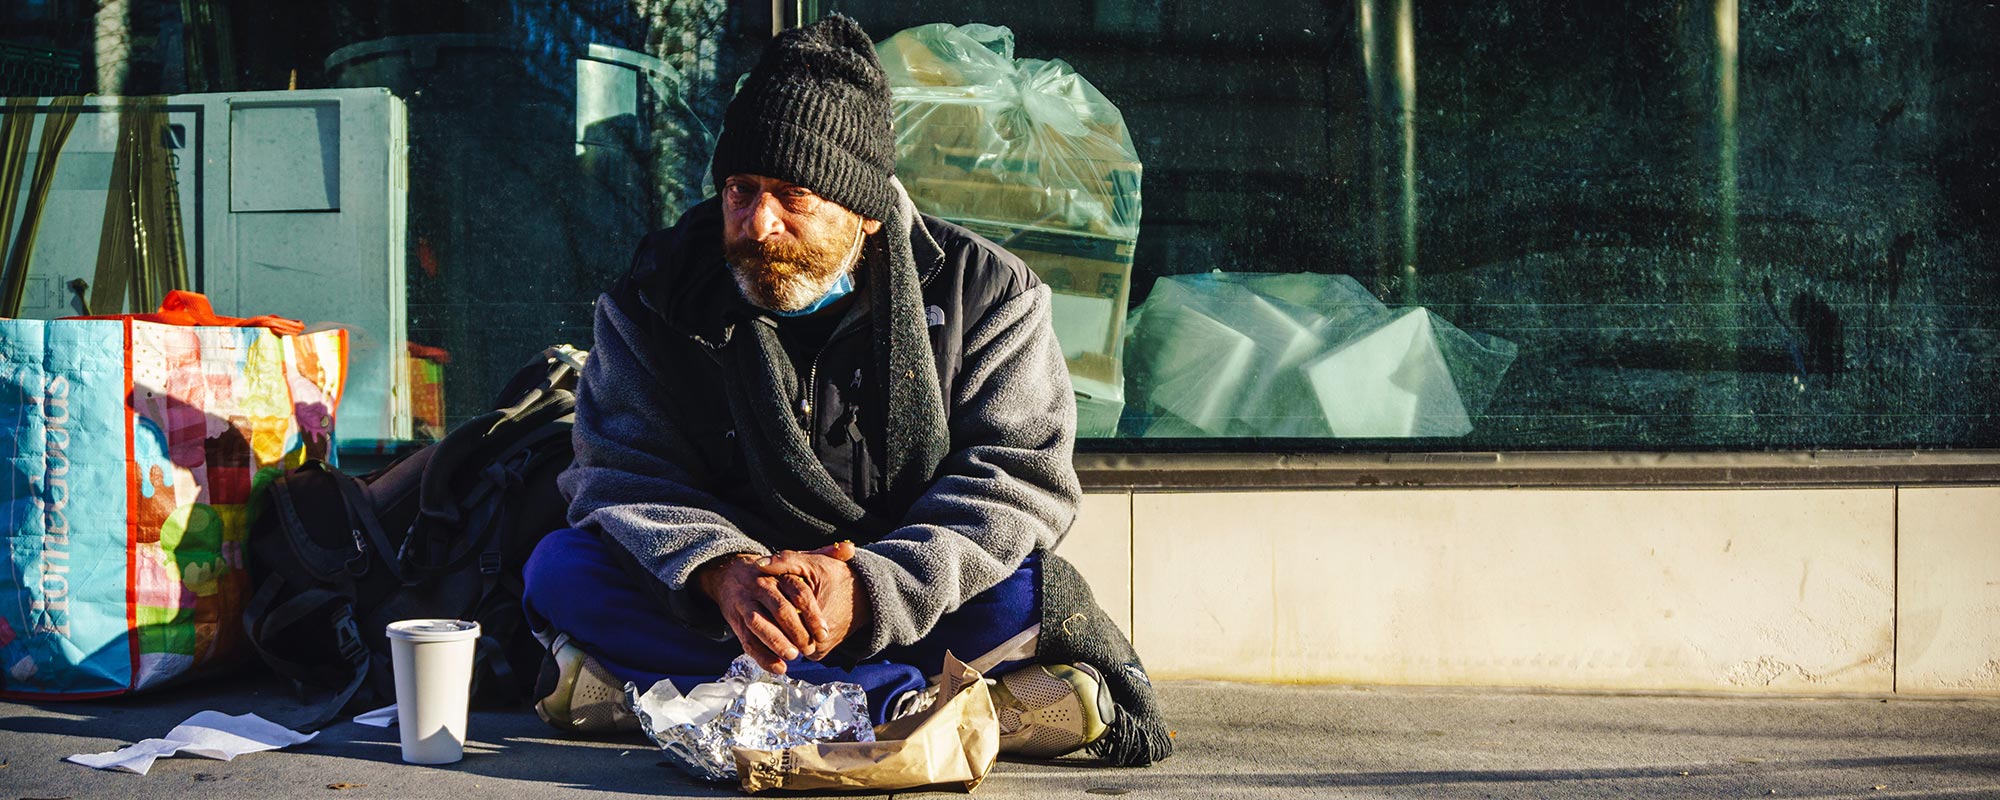 Superior Court Rules that the City of Toronto failed to protect the homeless.